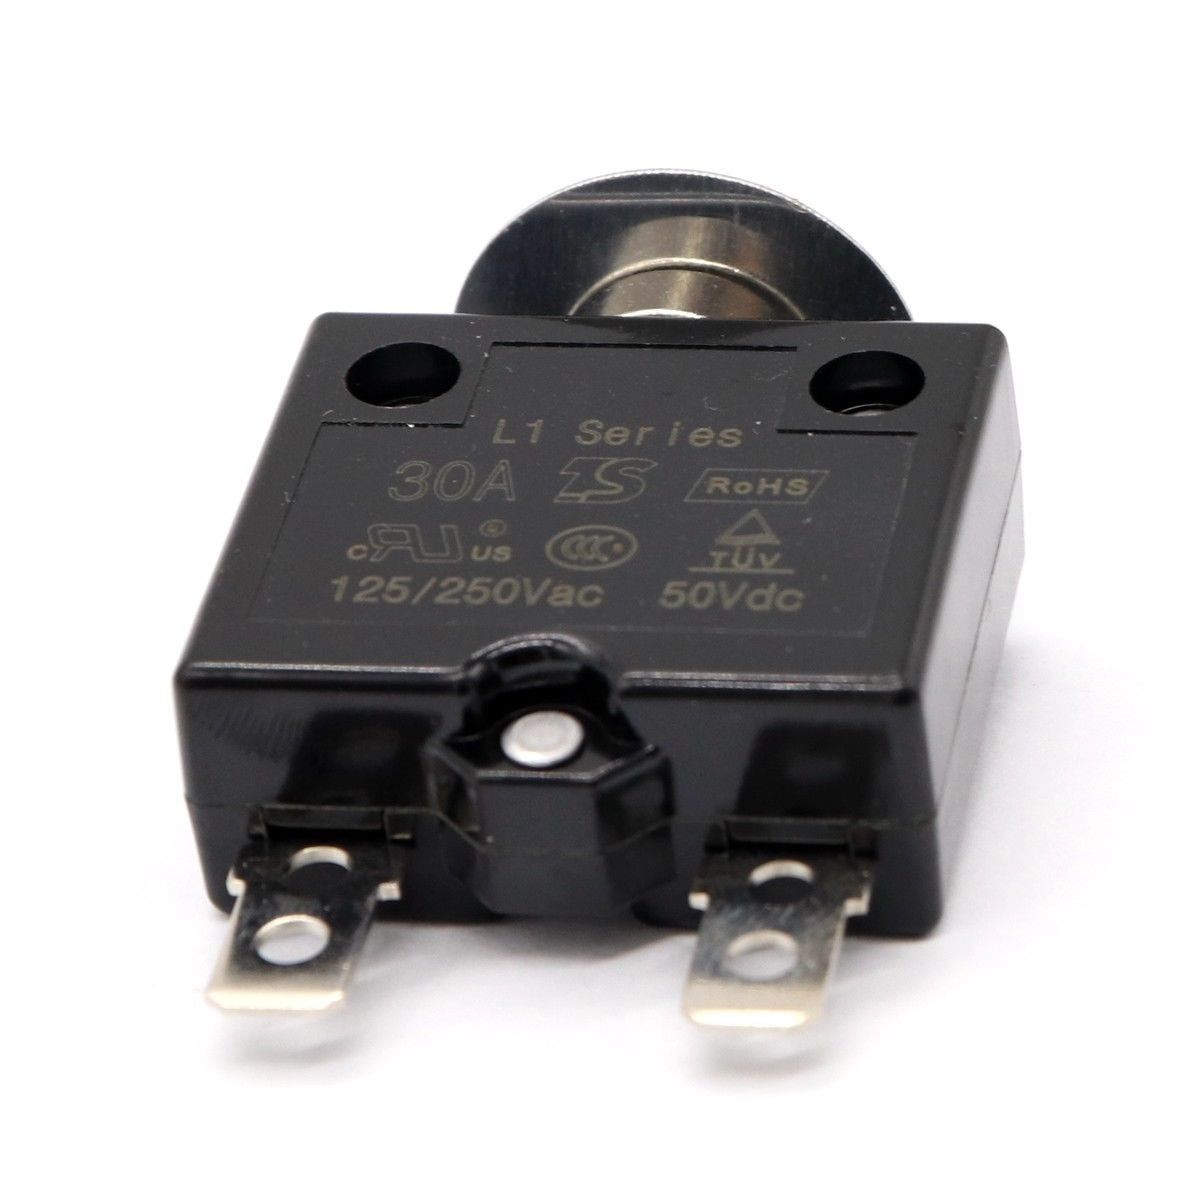 Details about   5 10 15 30A Push Button Circuit Breaker Overload Protector Manual Reset Thermal